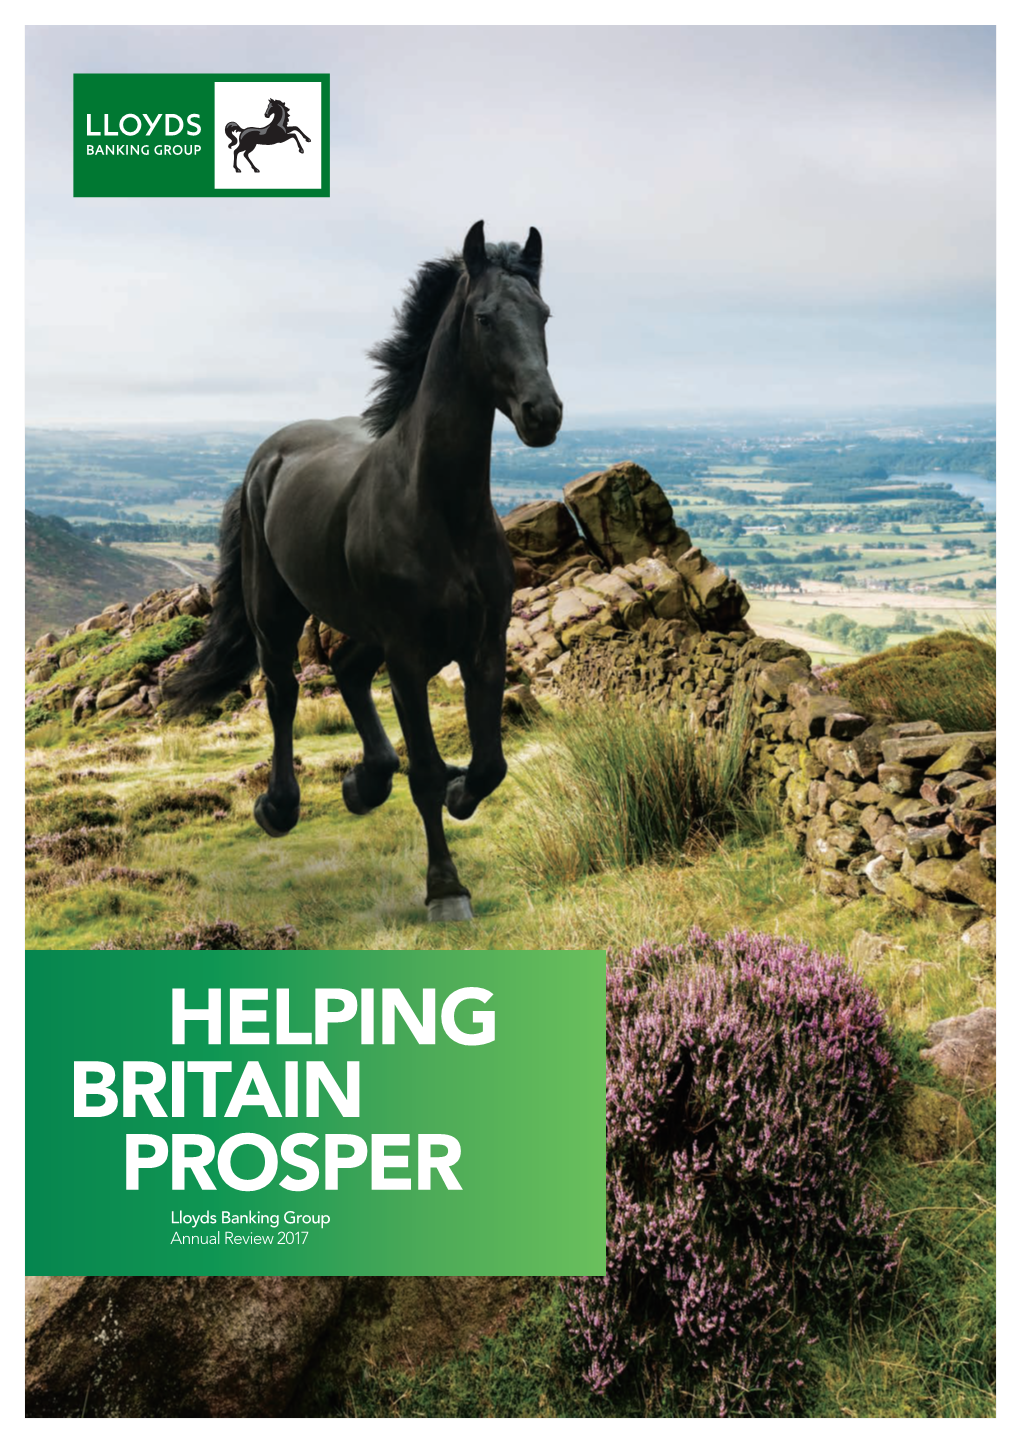 Annual Review 2017 About Us Our Purpose Is to Help Britain Prosper